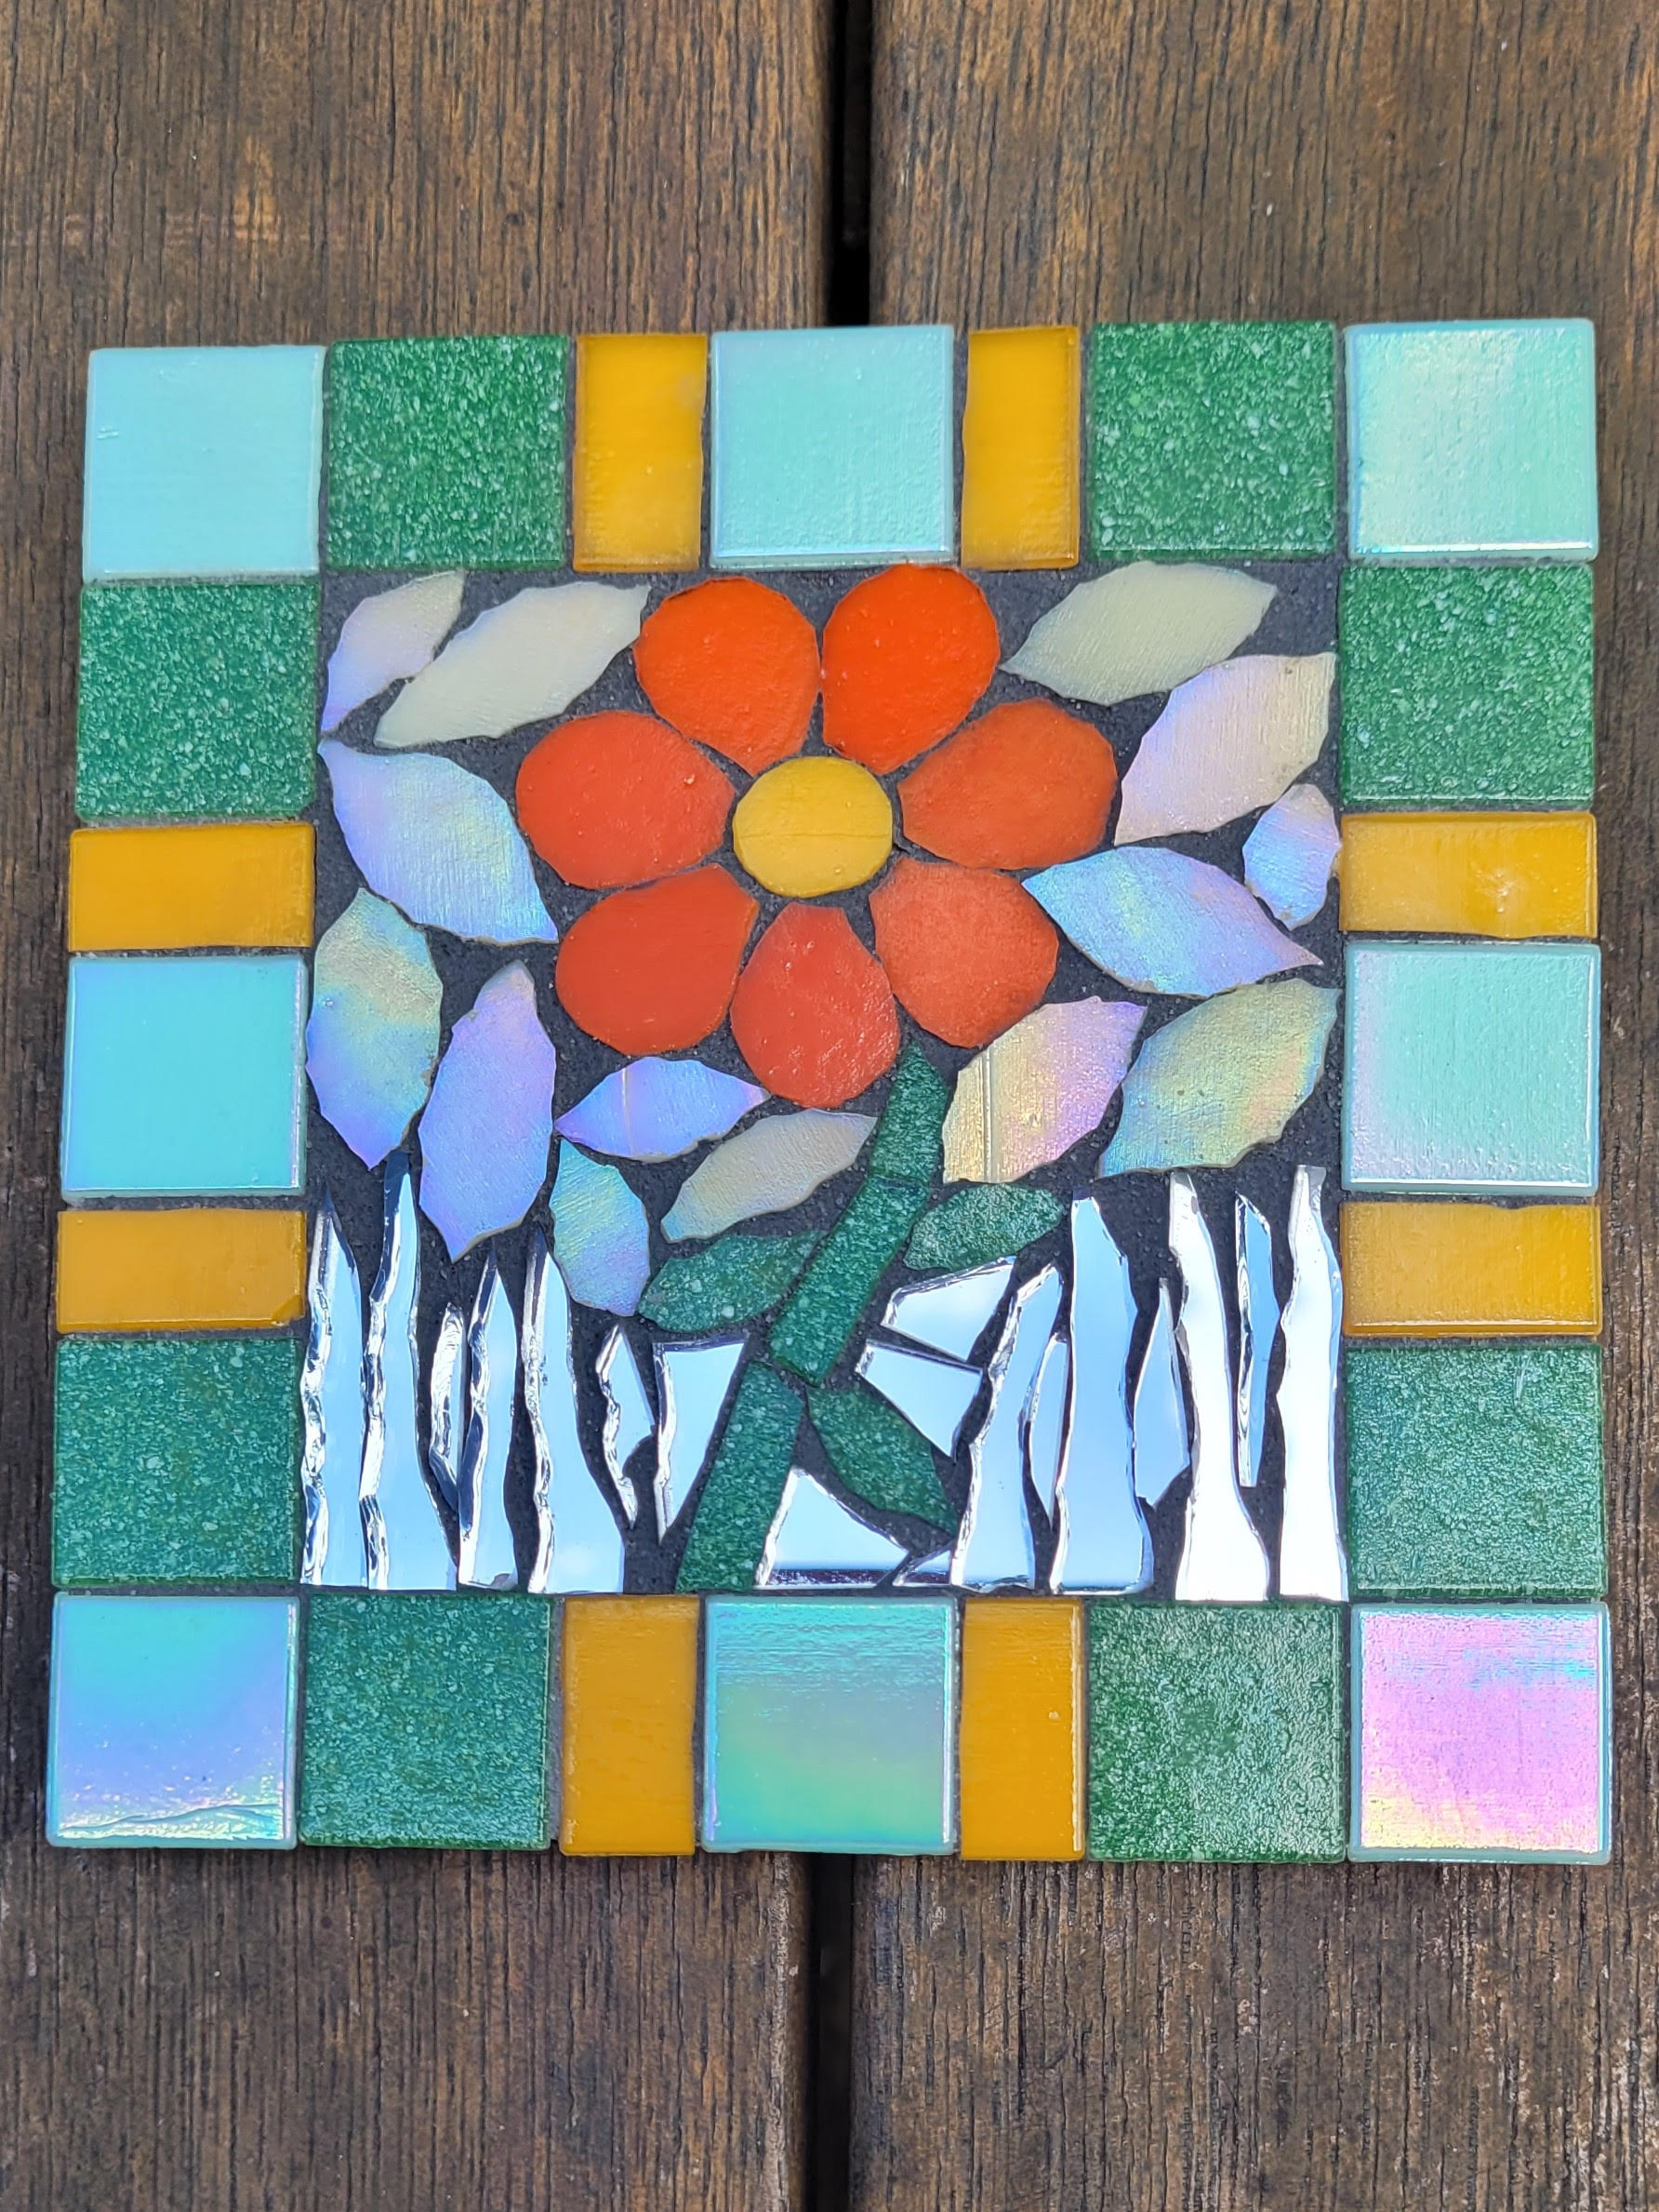 Mosaic Beginners Workshop - 14 May 2022 - Fully Booked